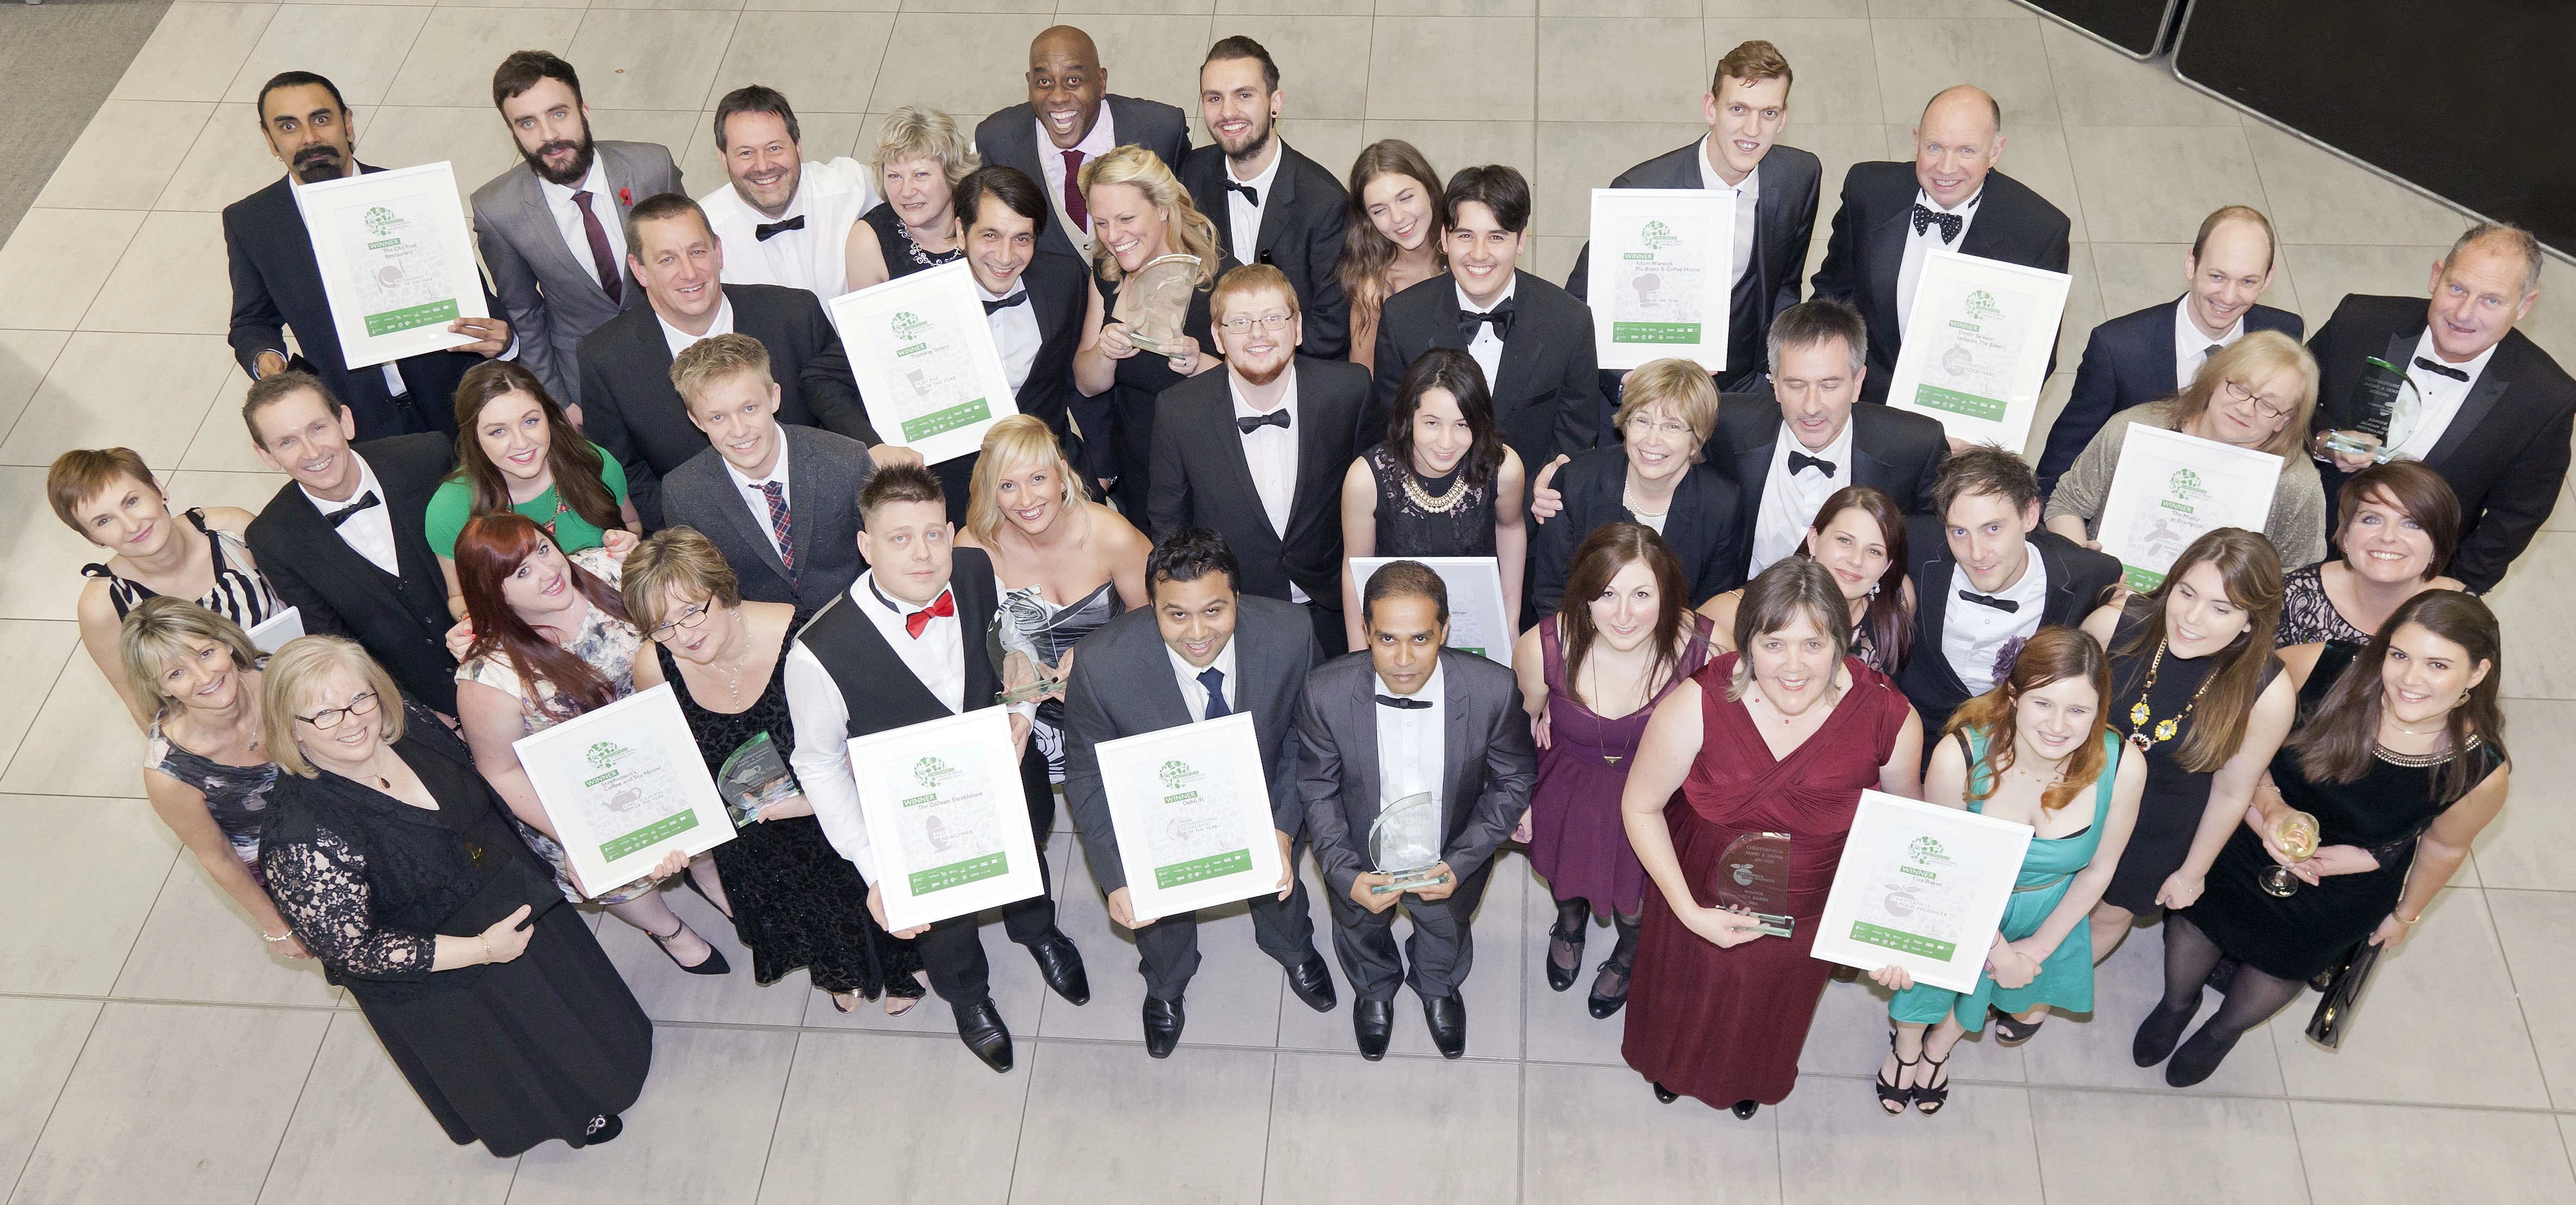 Winners fro last year's Chesterfield Food and Drink awards